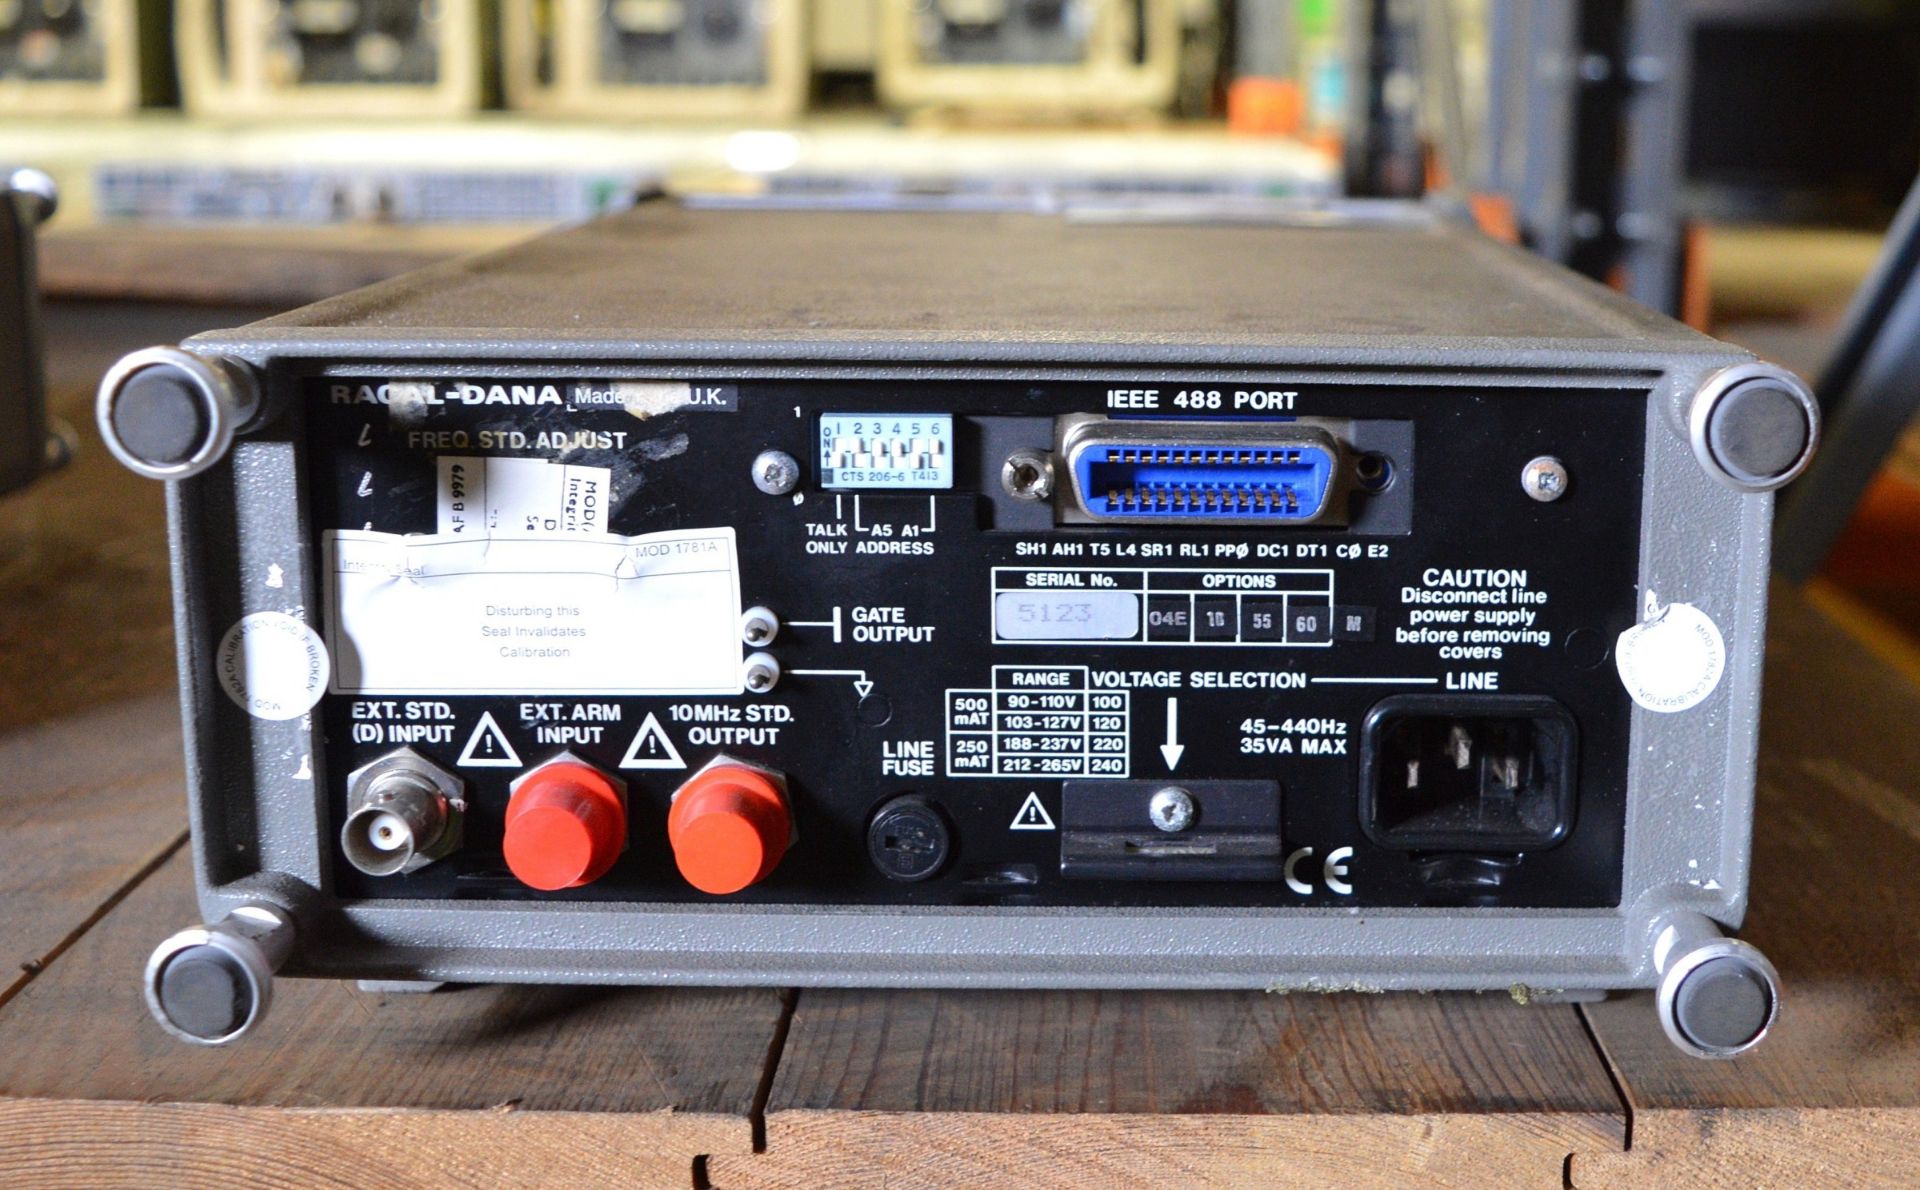 Racal-Dana 1998 Frequency Counter (No power cable) - Image 3 of 3